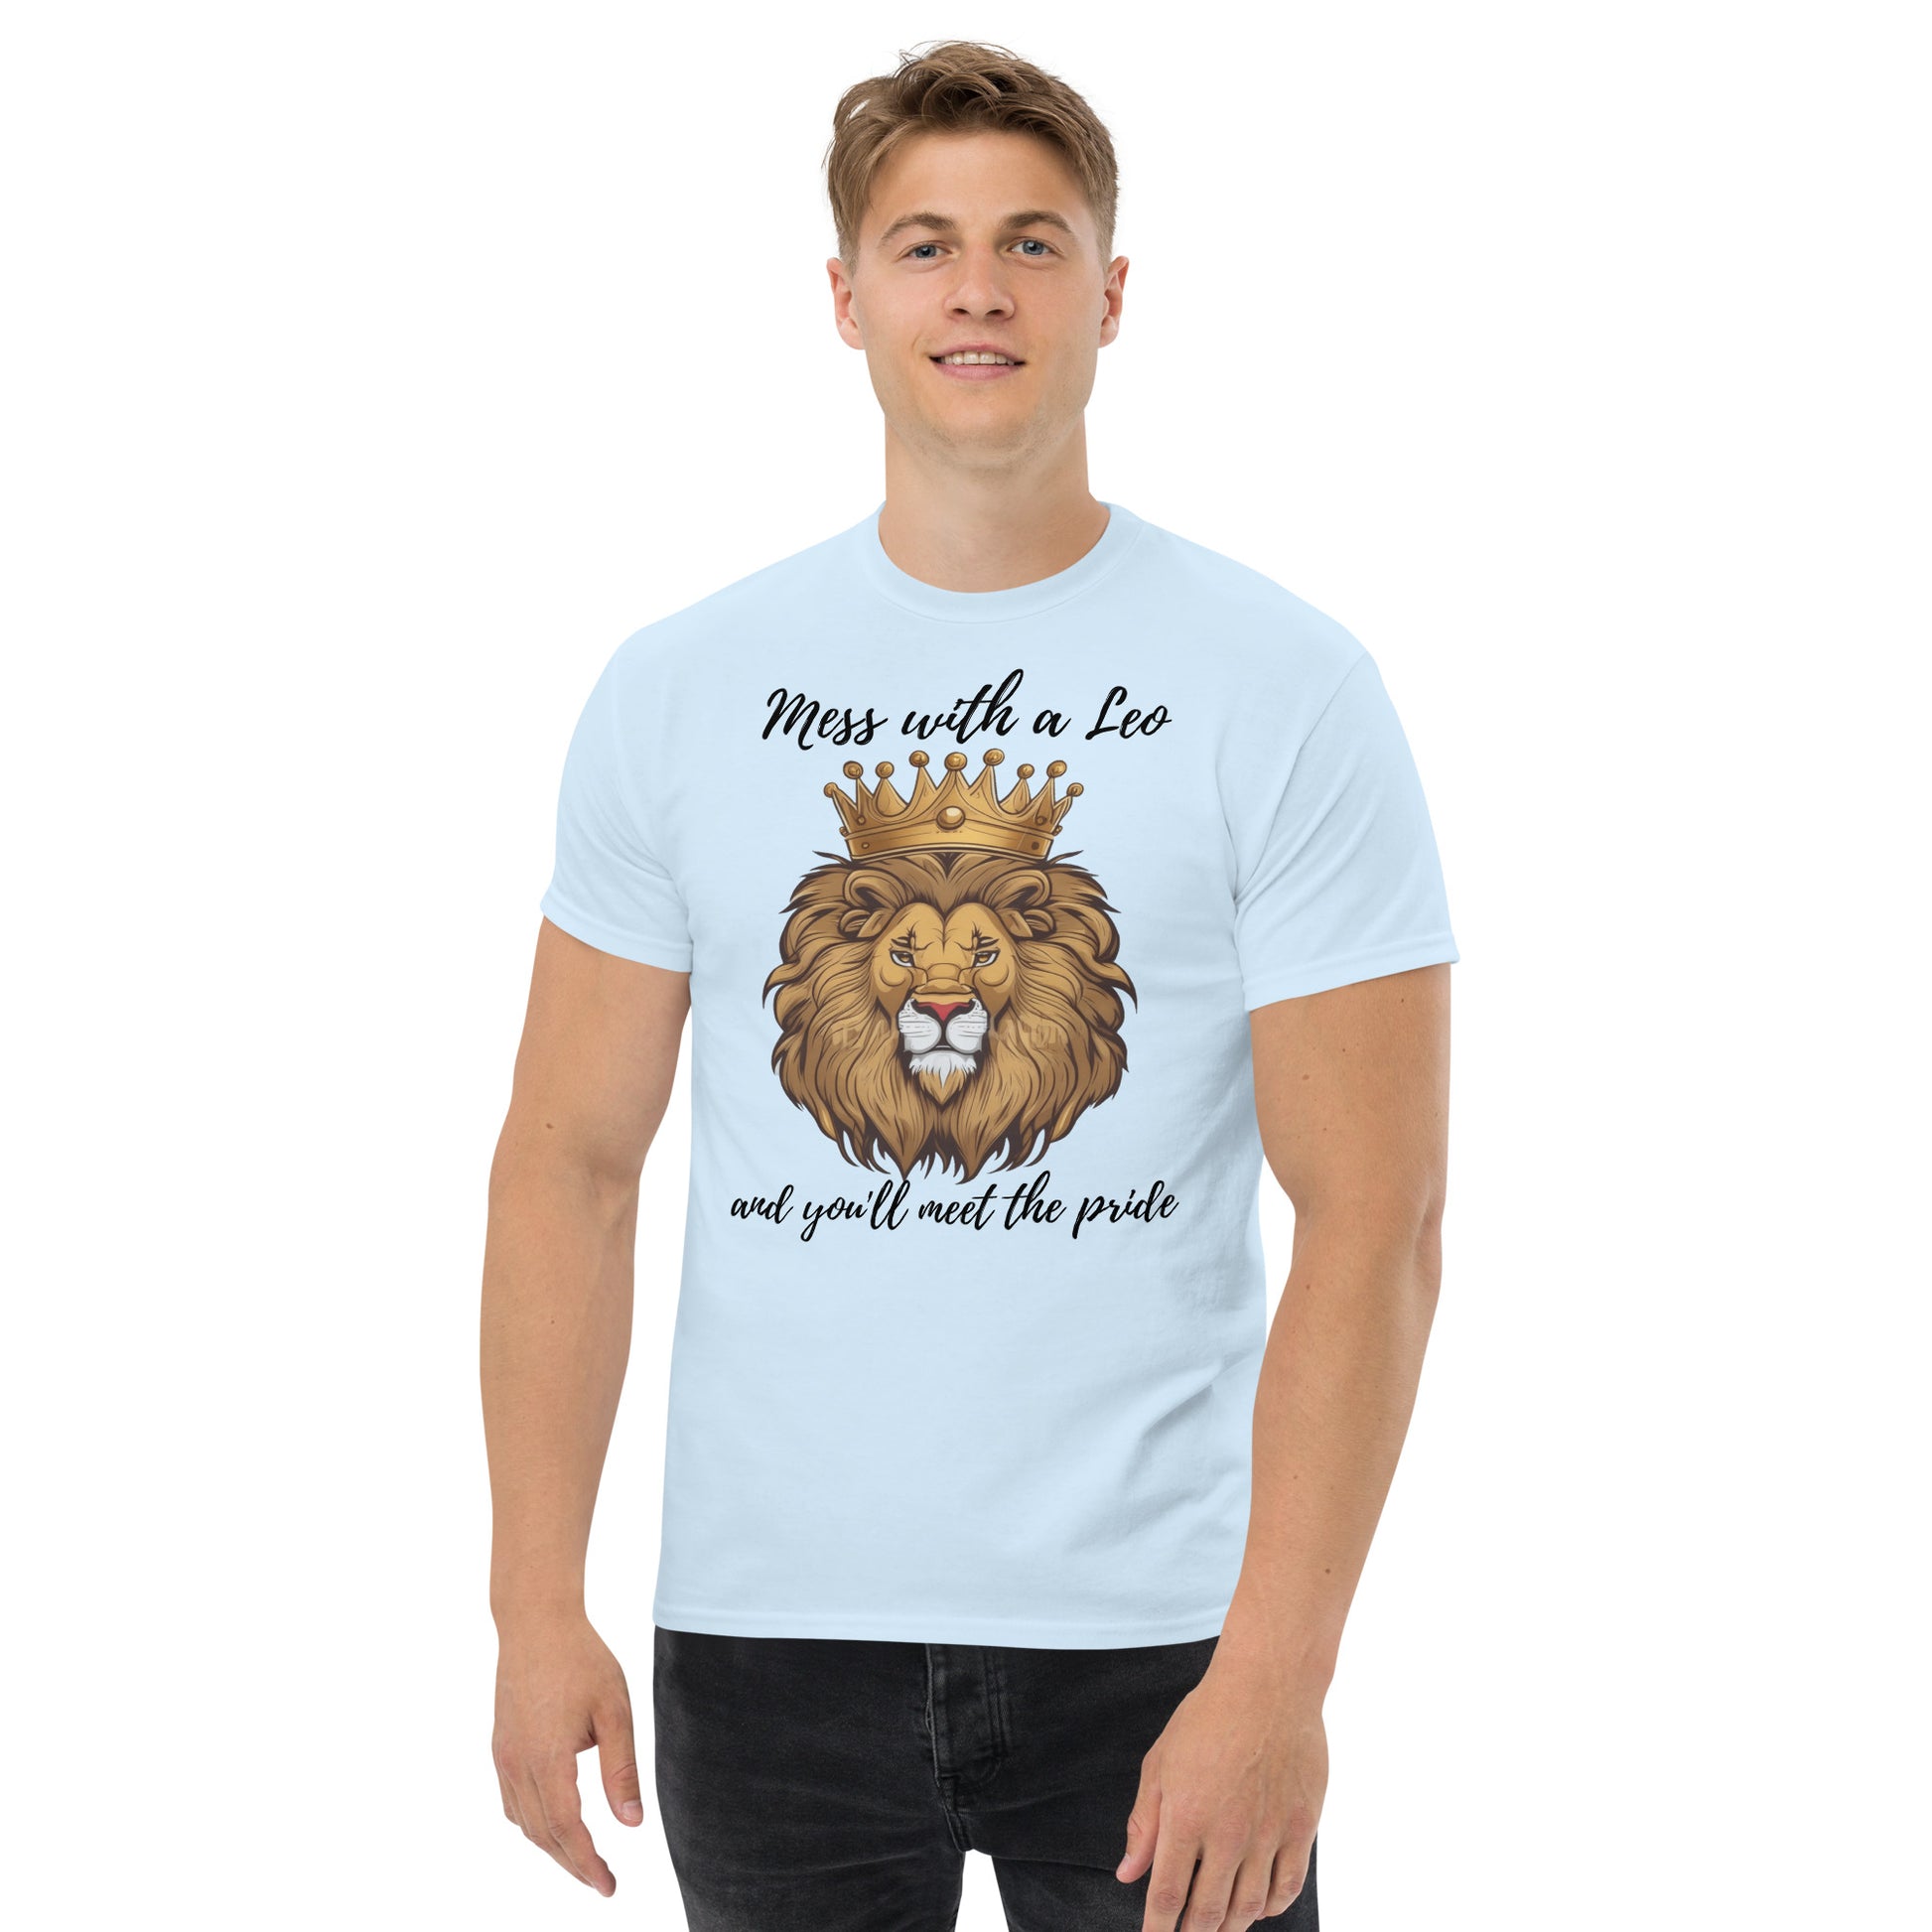 "Mess with a Leo and you'll meet the pride" T-Shirt